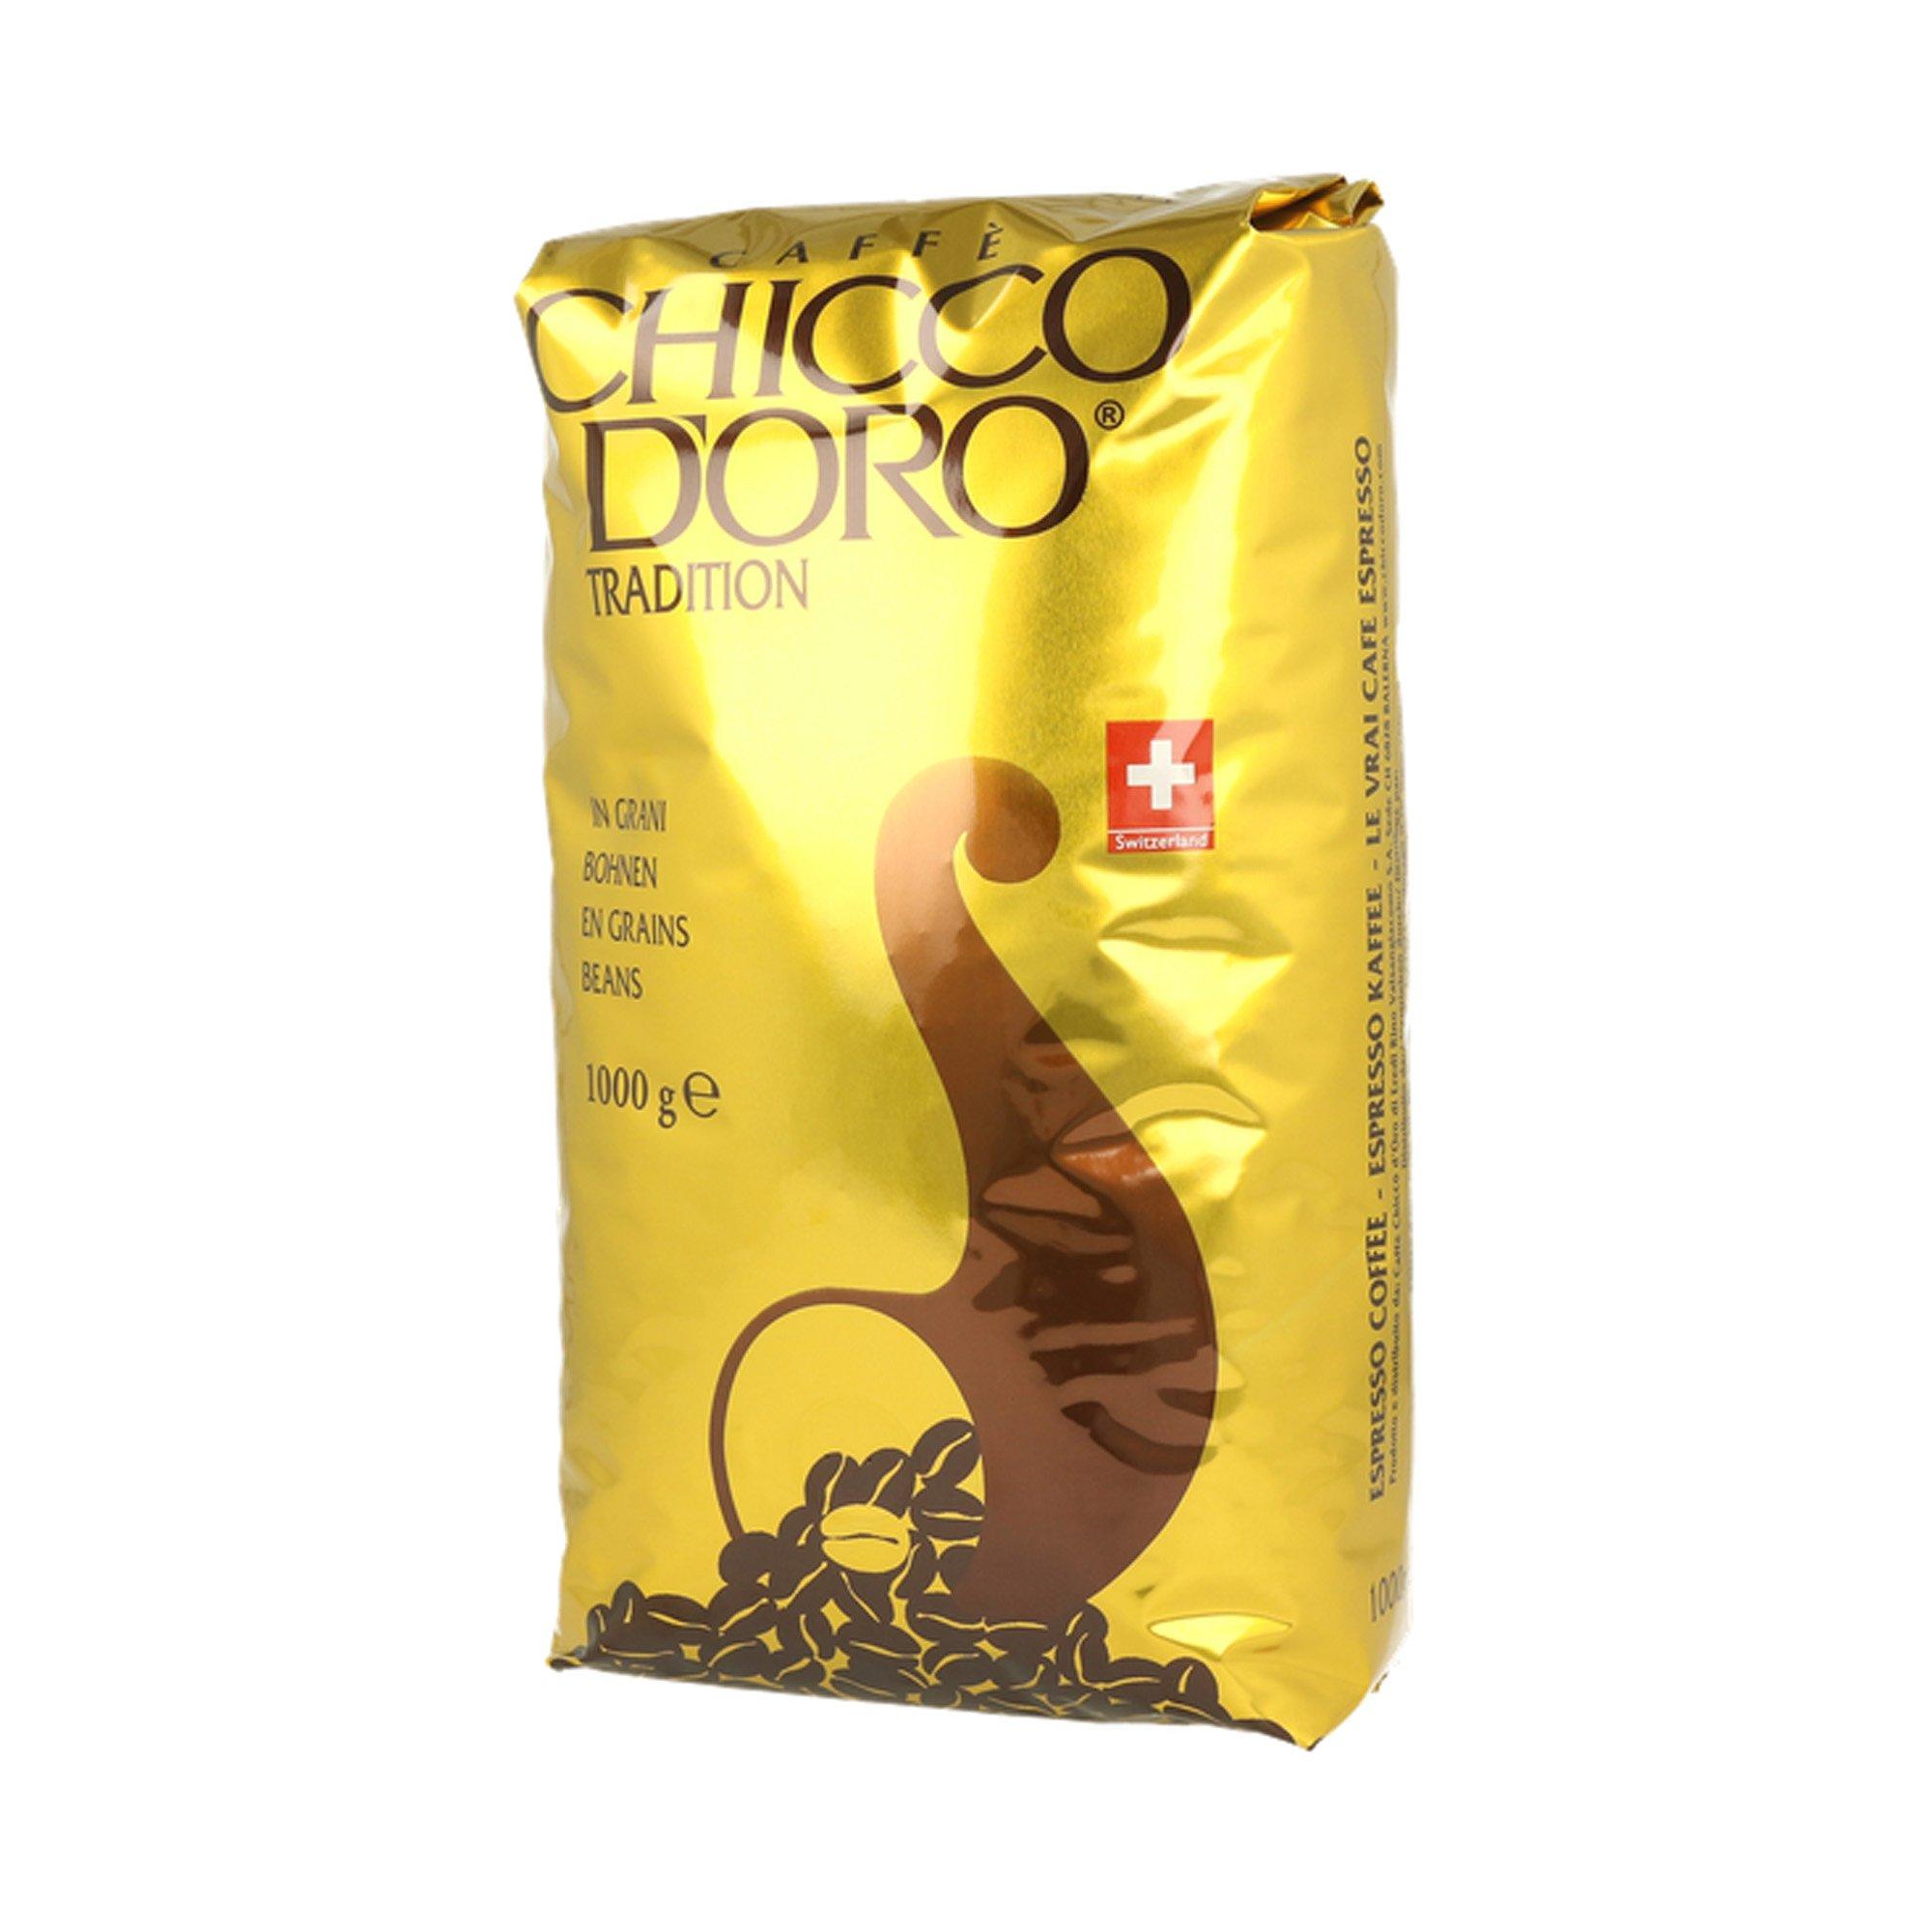 Image of CHICCO D'ORO Tradition - 1 kg